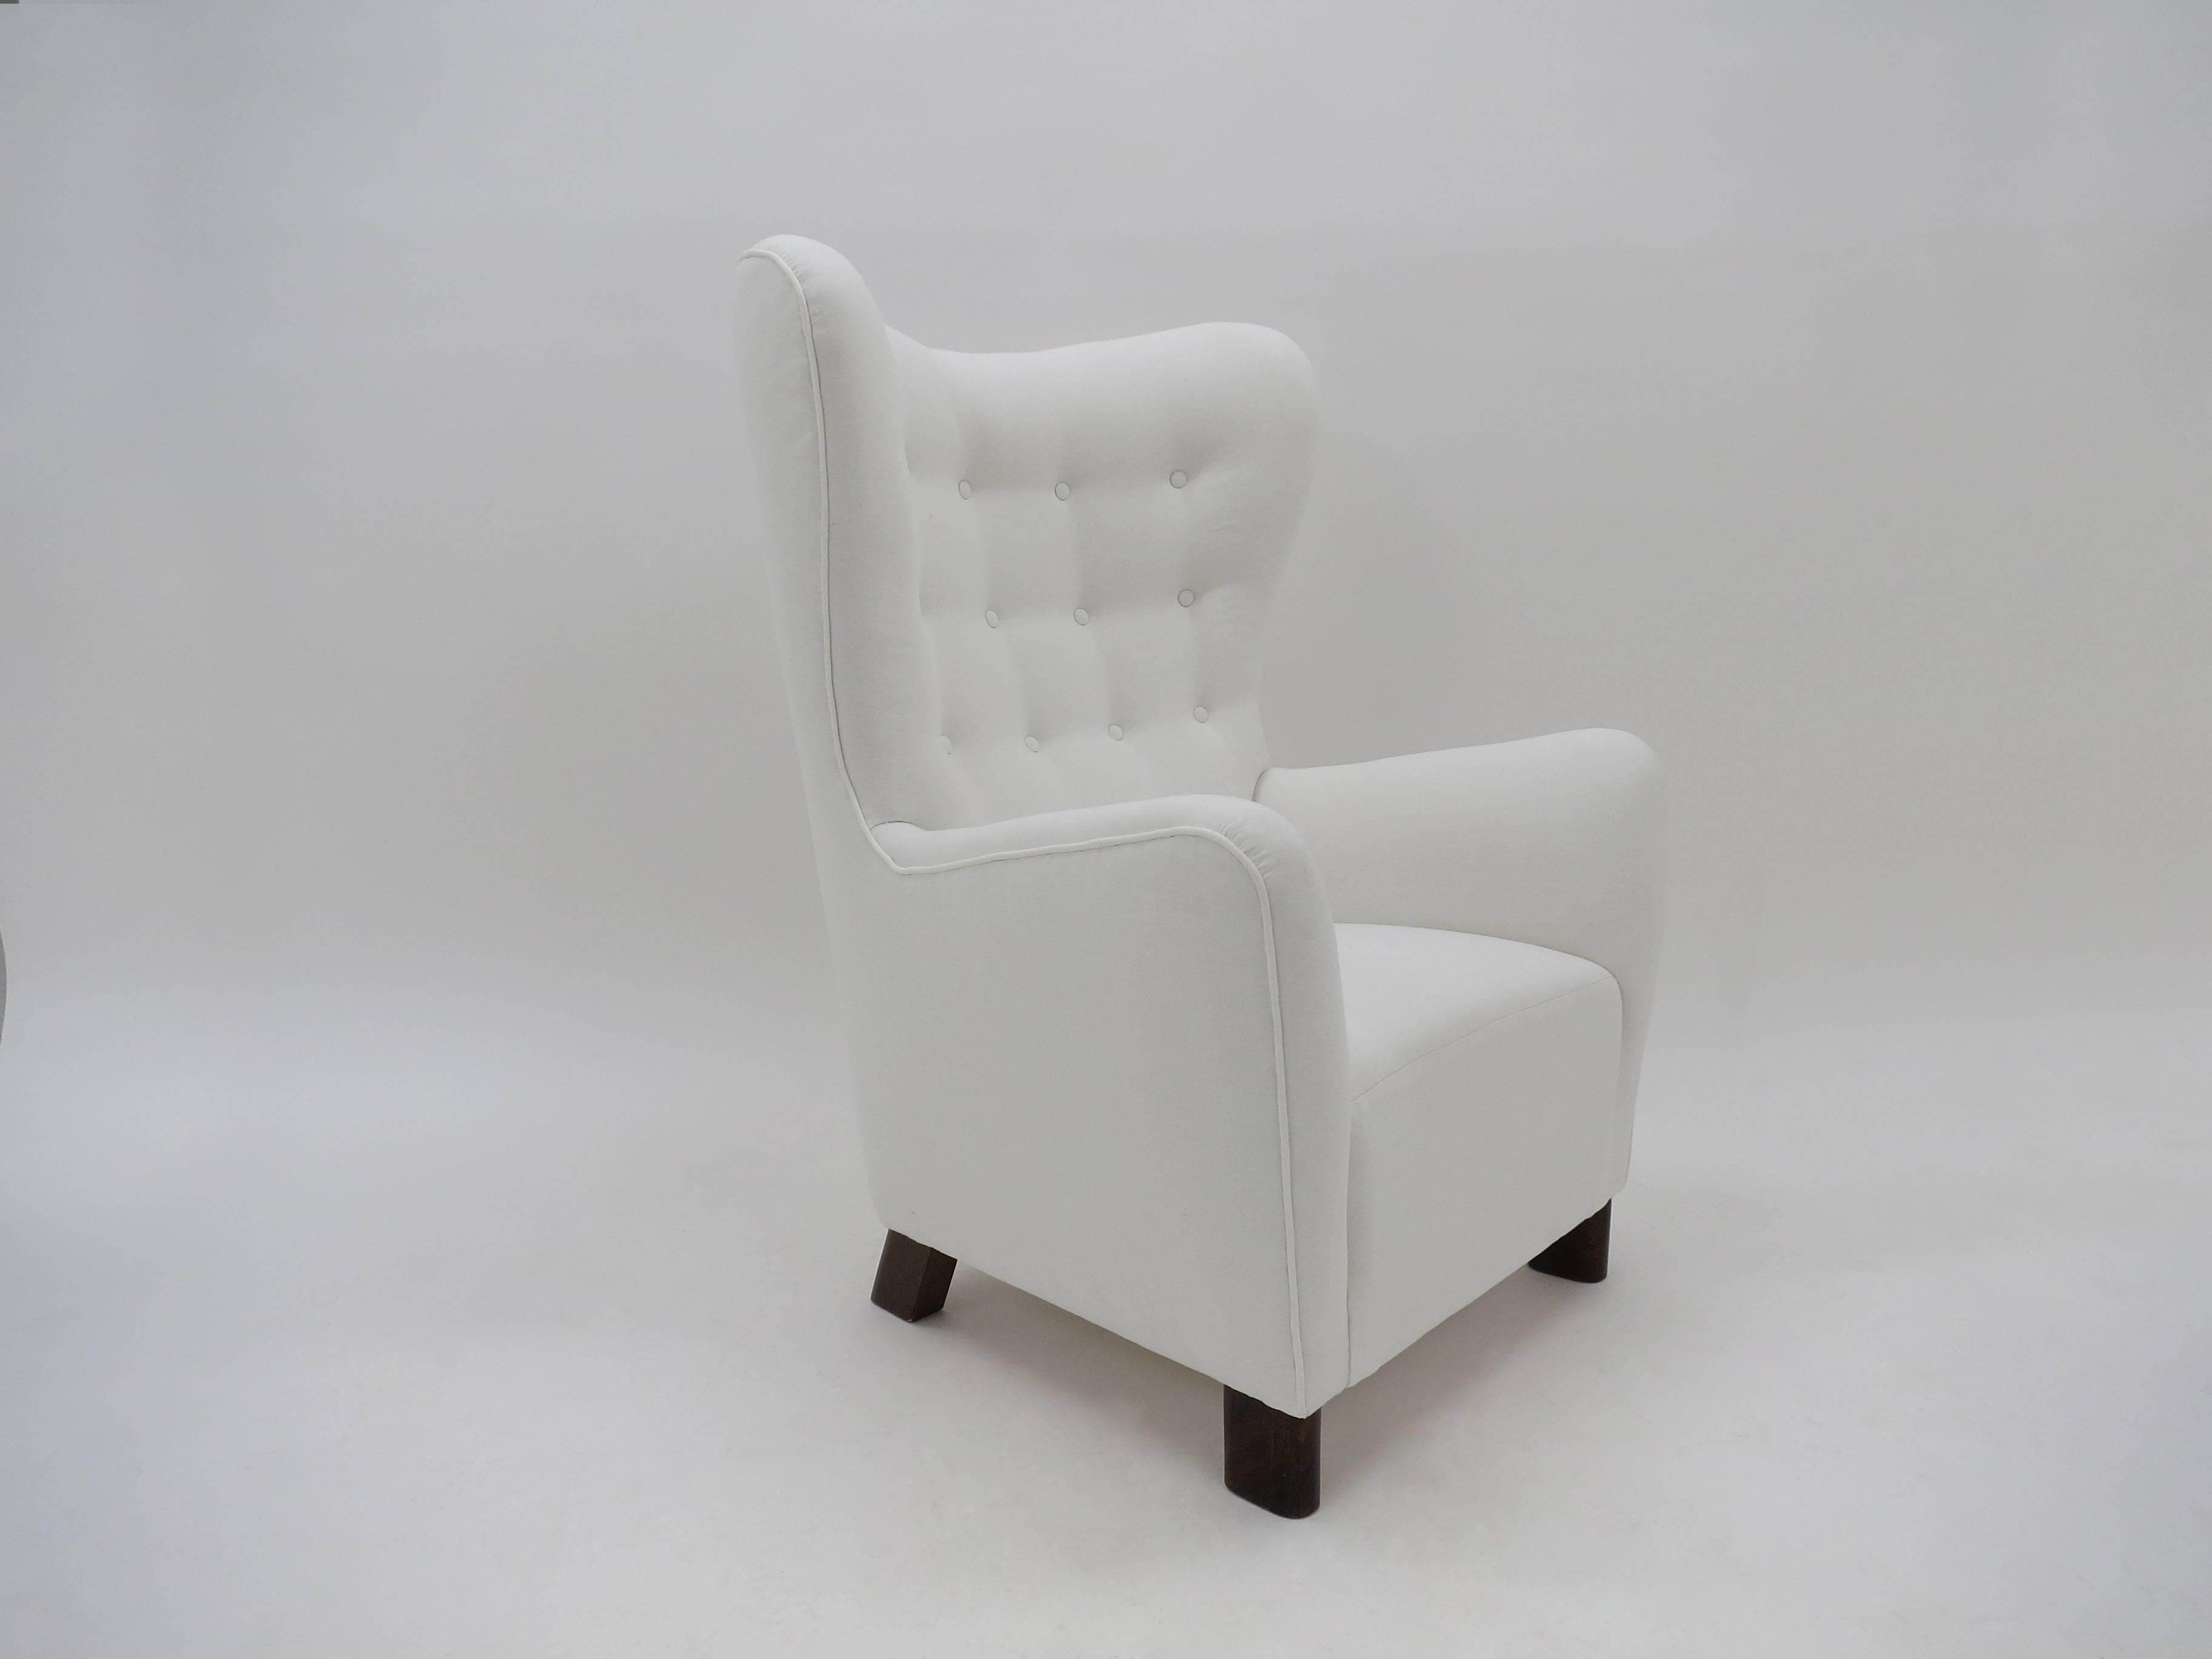 A rare  original Fritz Hansen armchair model number 1669 from the 1940s. This wingback armchair has been reupholstered in linen, resting on lozenge shaped diagonal mahogany legs.

A very beautiful armchair with lovely curves and organic forms that